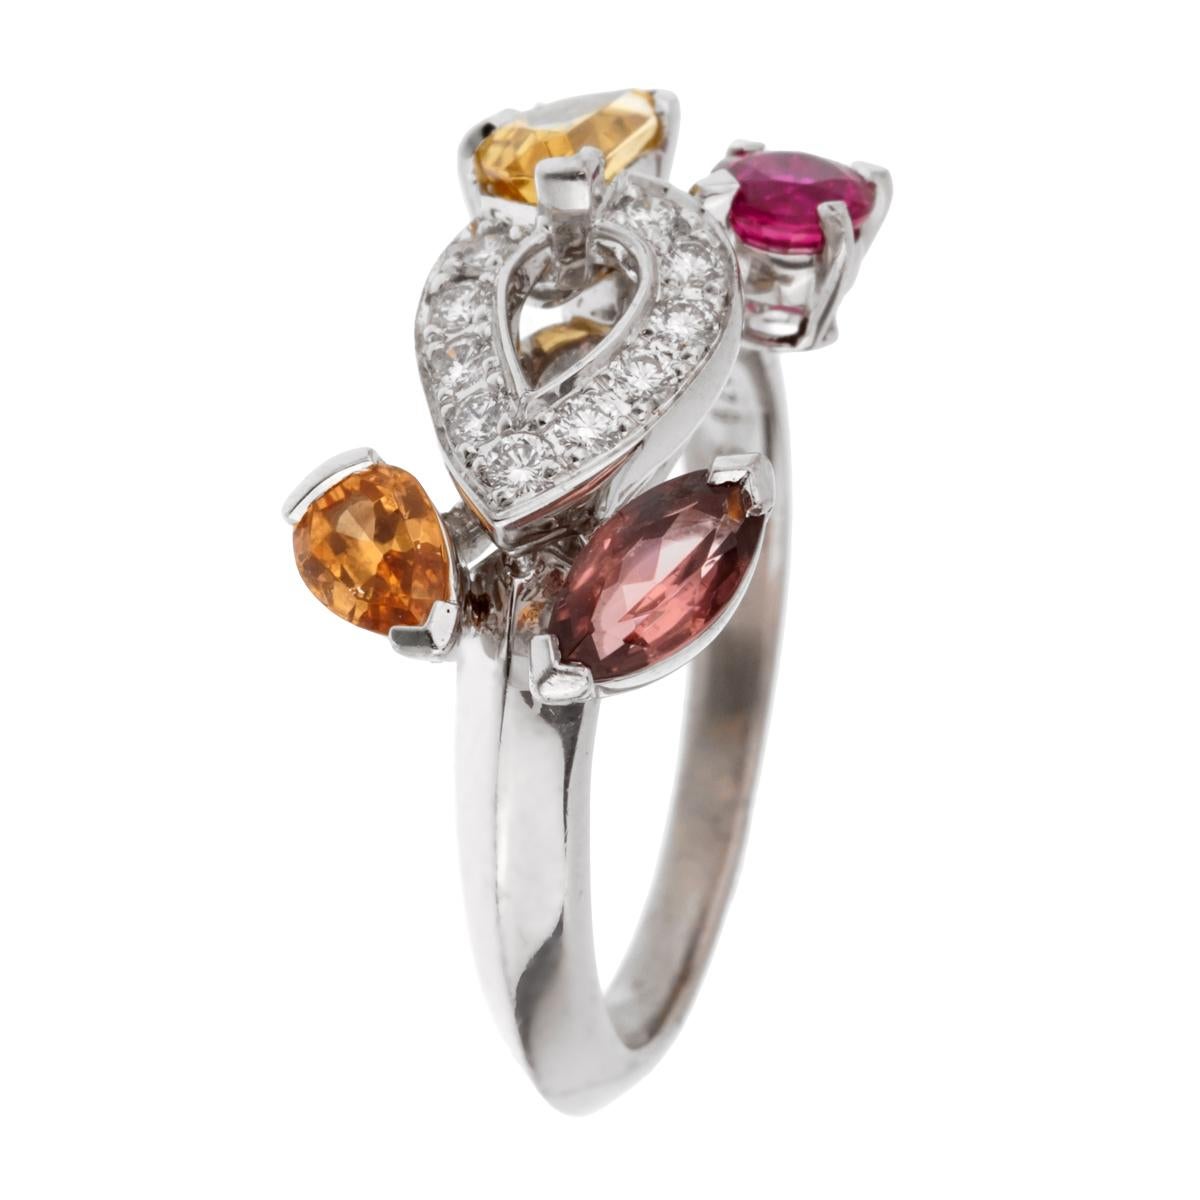 A fabulous Cartier crafted in 18k white gold adorned withwith diamond, ruby, tourmaline, citrine and imperial topaz stones. The ring showcases a knife edge design and measures a size 6 1/2 (Resizeable)